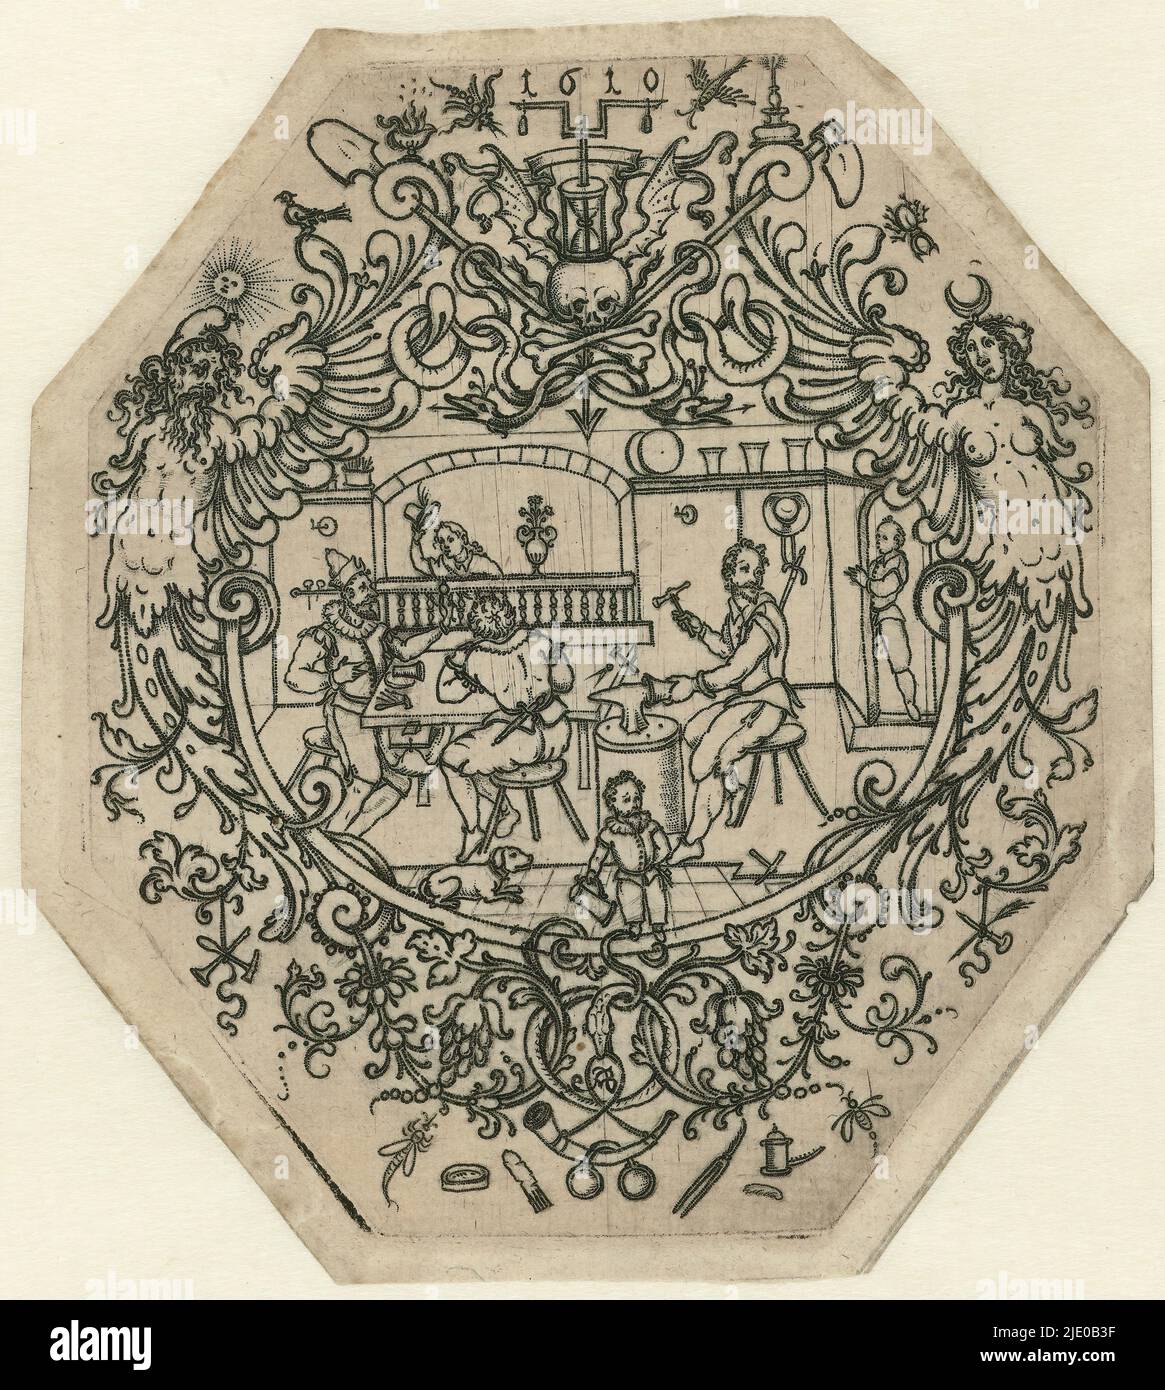 Workshop of a jeweler, Octagonal cartouche with garlands between which tools, insects, snakes and birds. Left and right a winged herm with the sun, resp moon, at top a skull with bat wings and an hourglass. In the cartouche three men at work in a goldsmith's workshop. To the right, a man comes through a door. In the foreground a dwarf and a dog. In the background behind a balustrade a man taking off his hat., print maker: Monogrammist AB (17e eeuw), (mentioned on object), Germany, 1610, paper, height 160 mm × width 138 mm Stock Photo